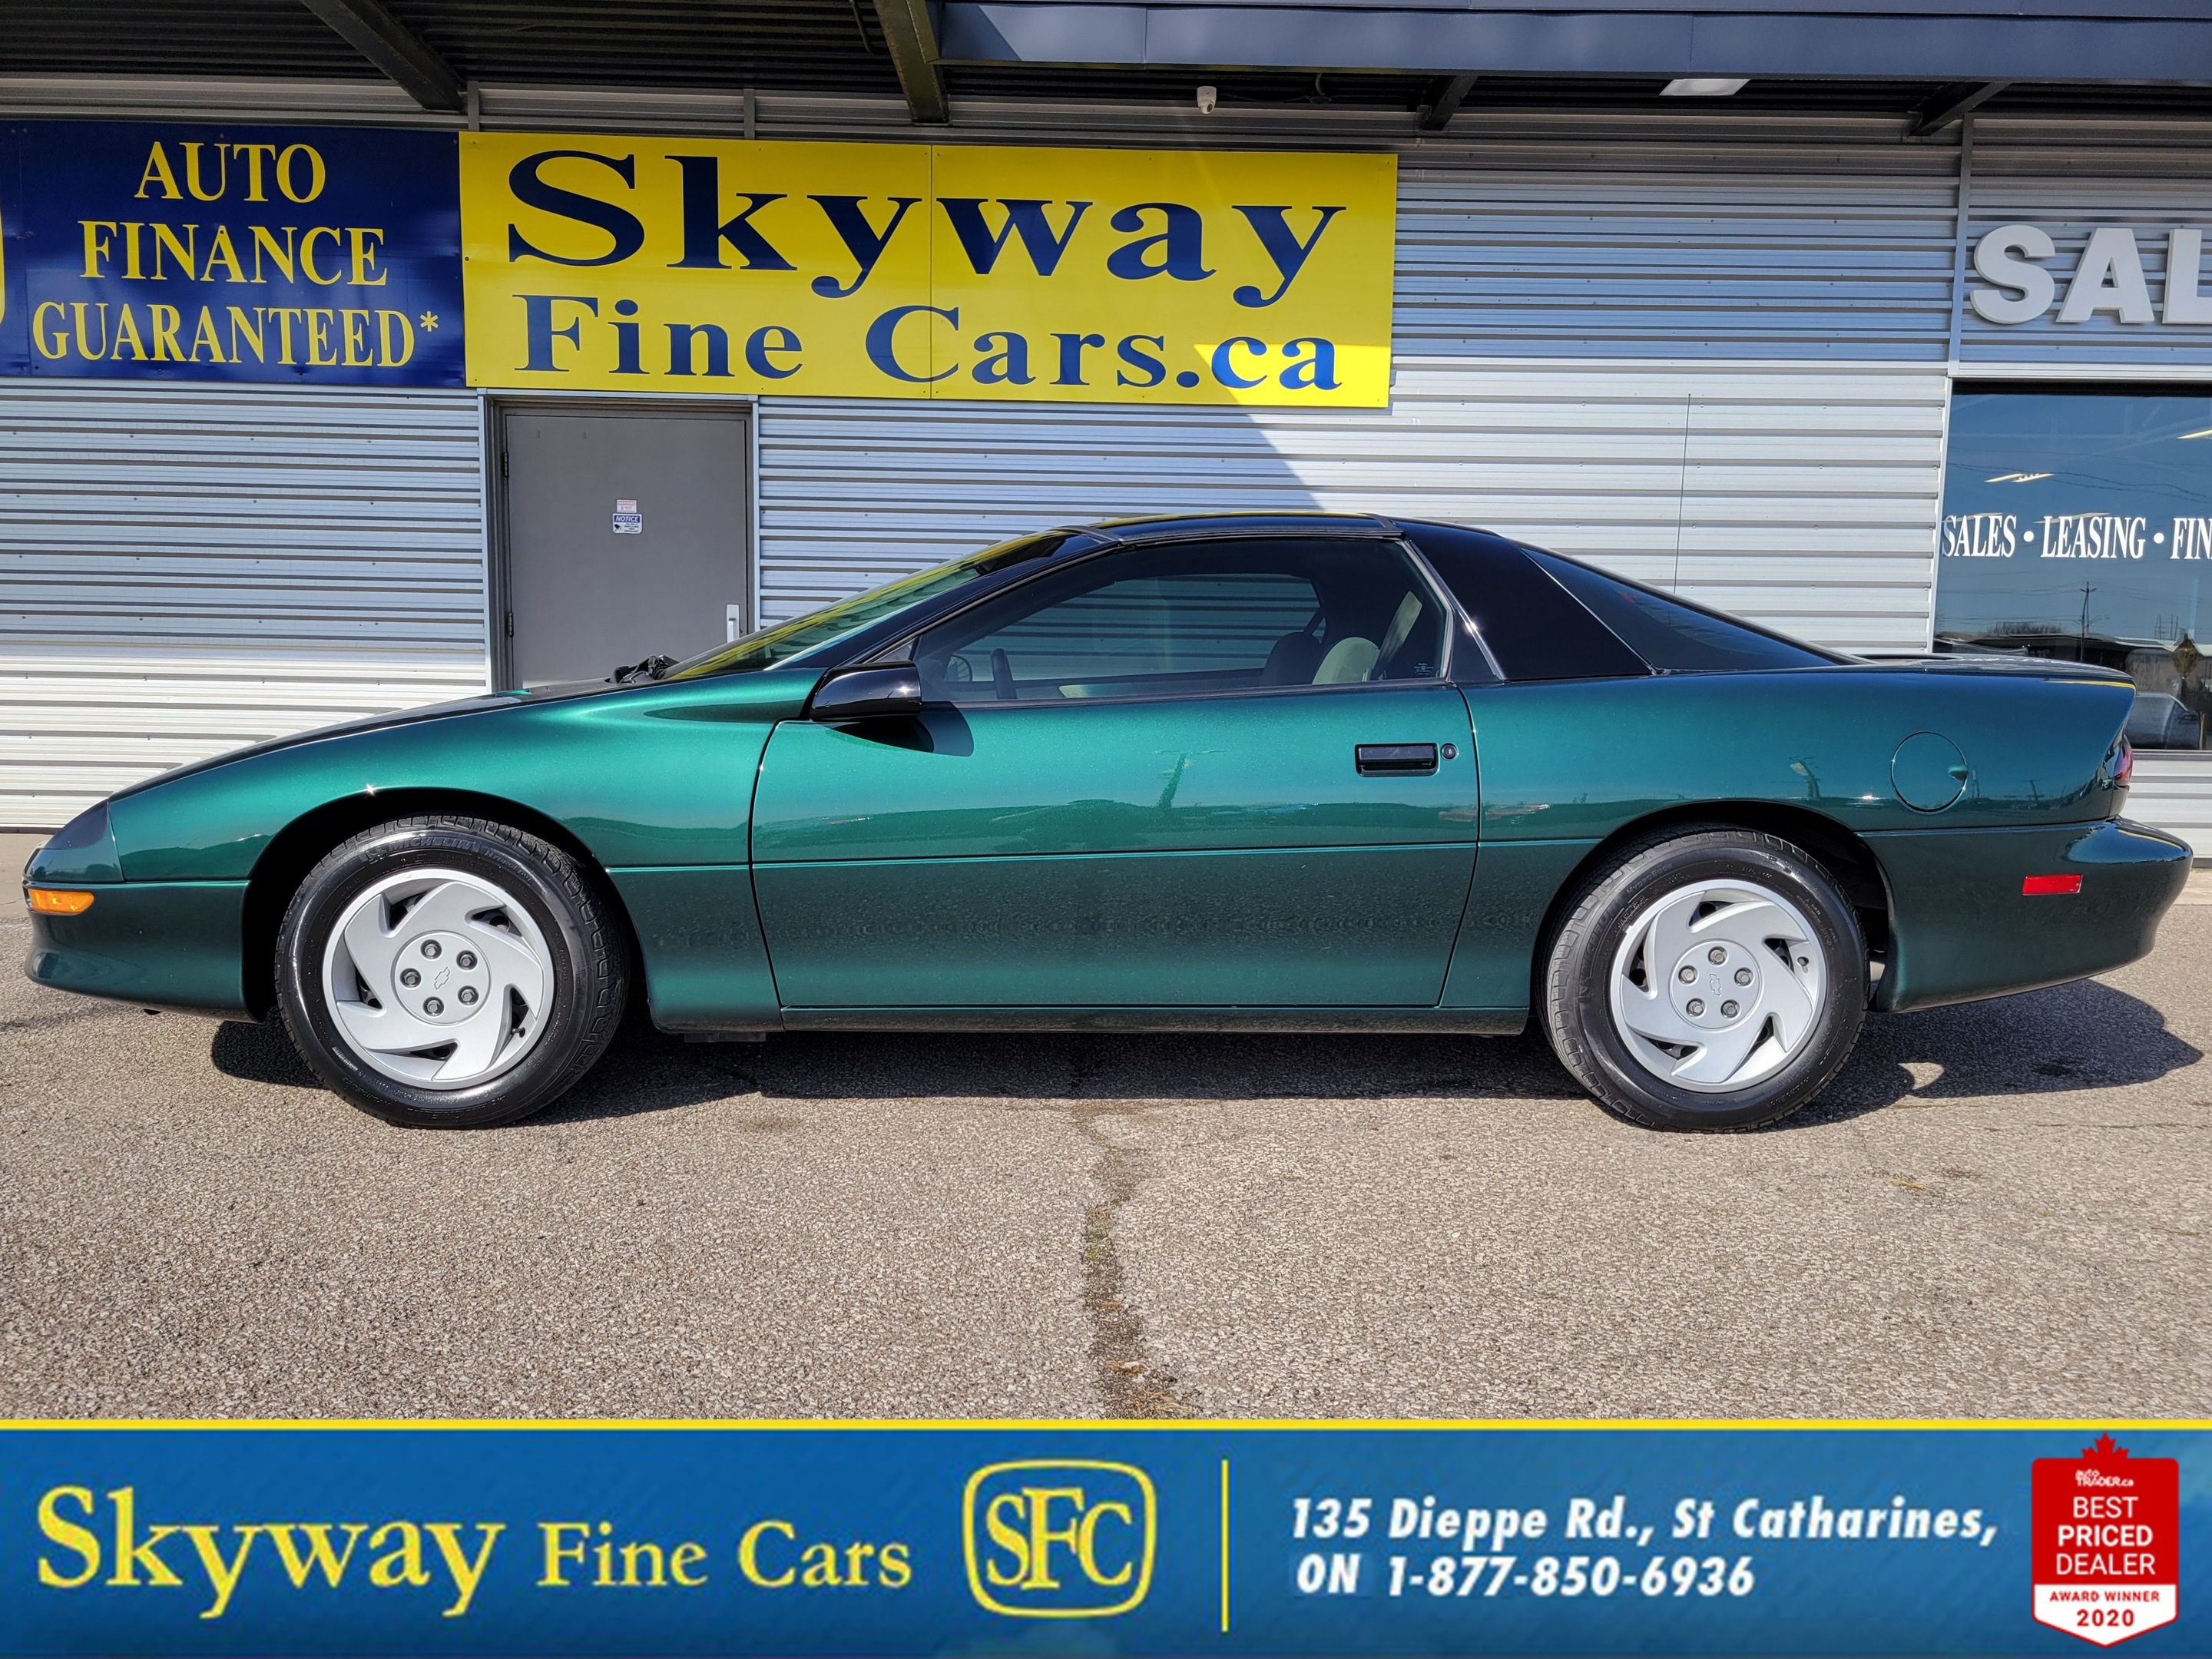 1996 Chevrolet Camaro LOW KLMS | T-TOPS | V-6 3800 | CARFAX CLEAN | 